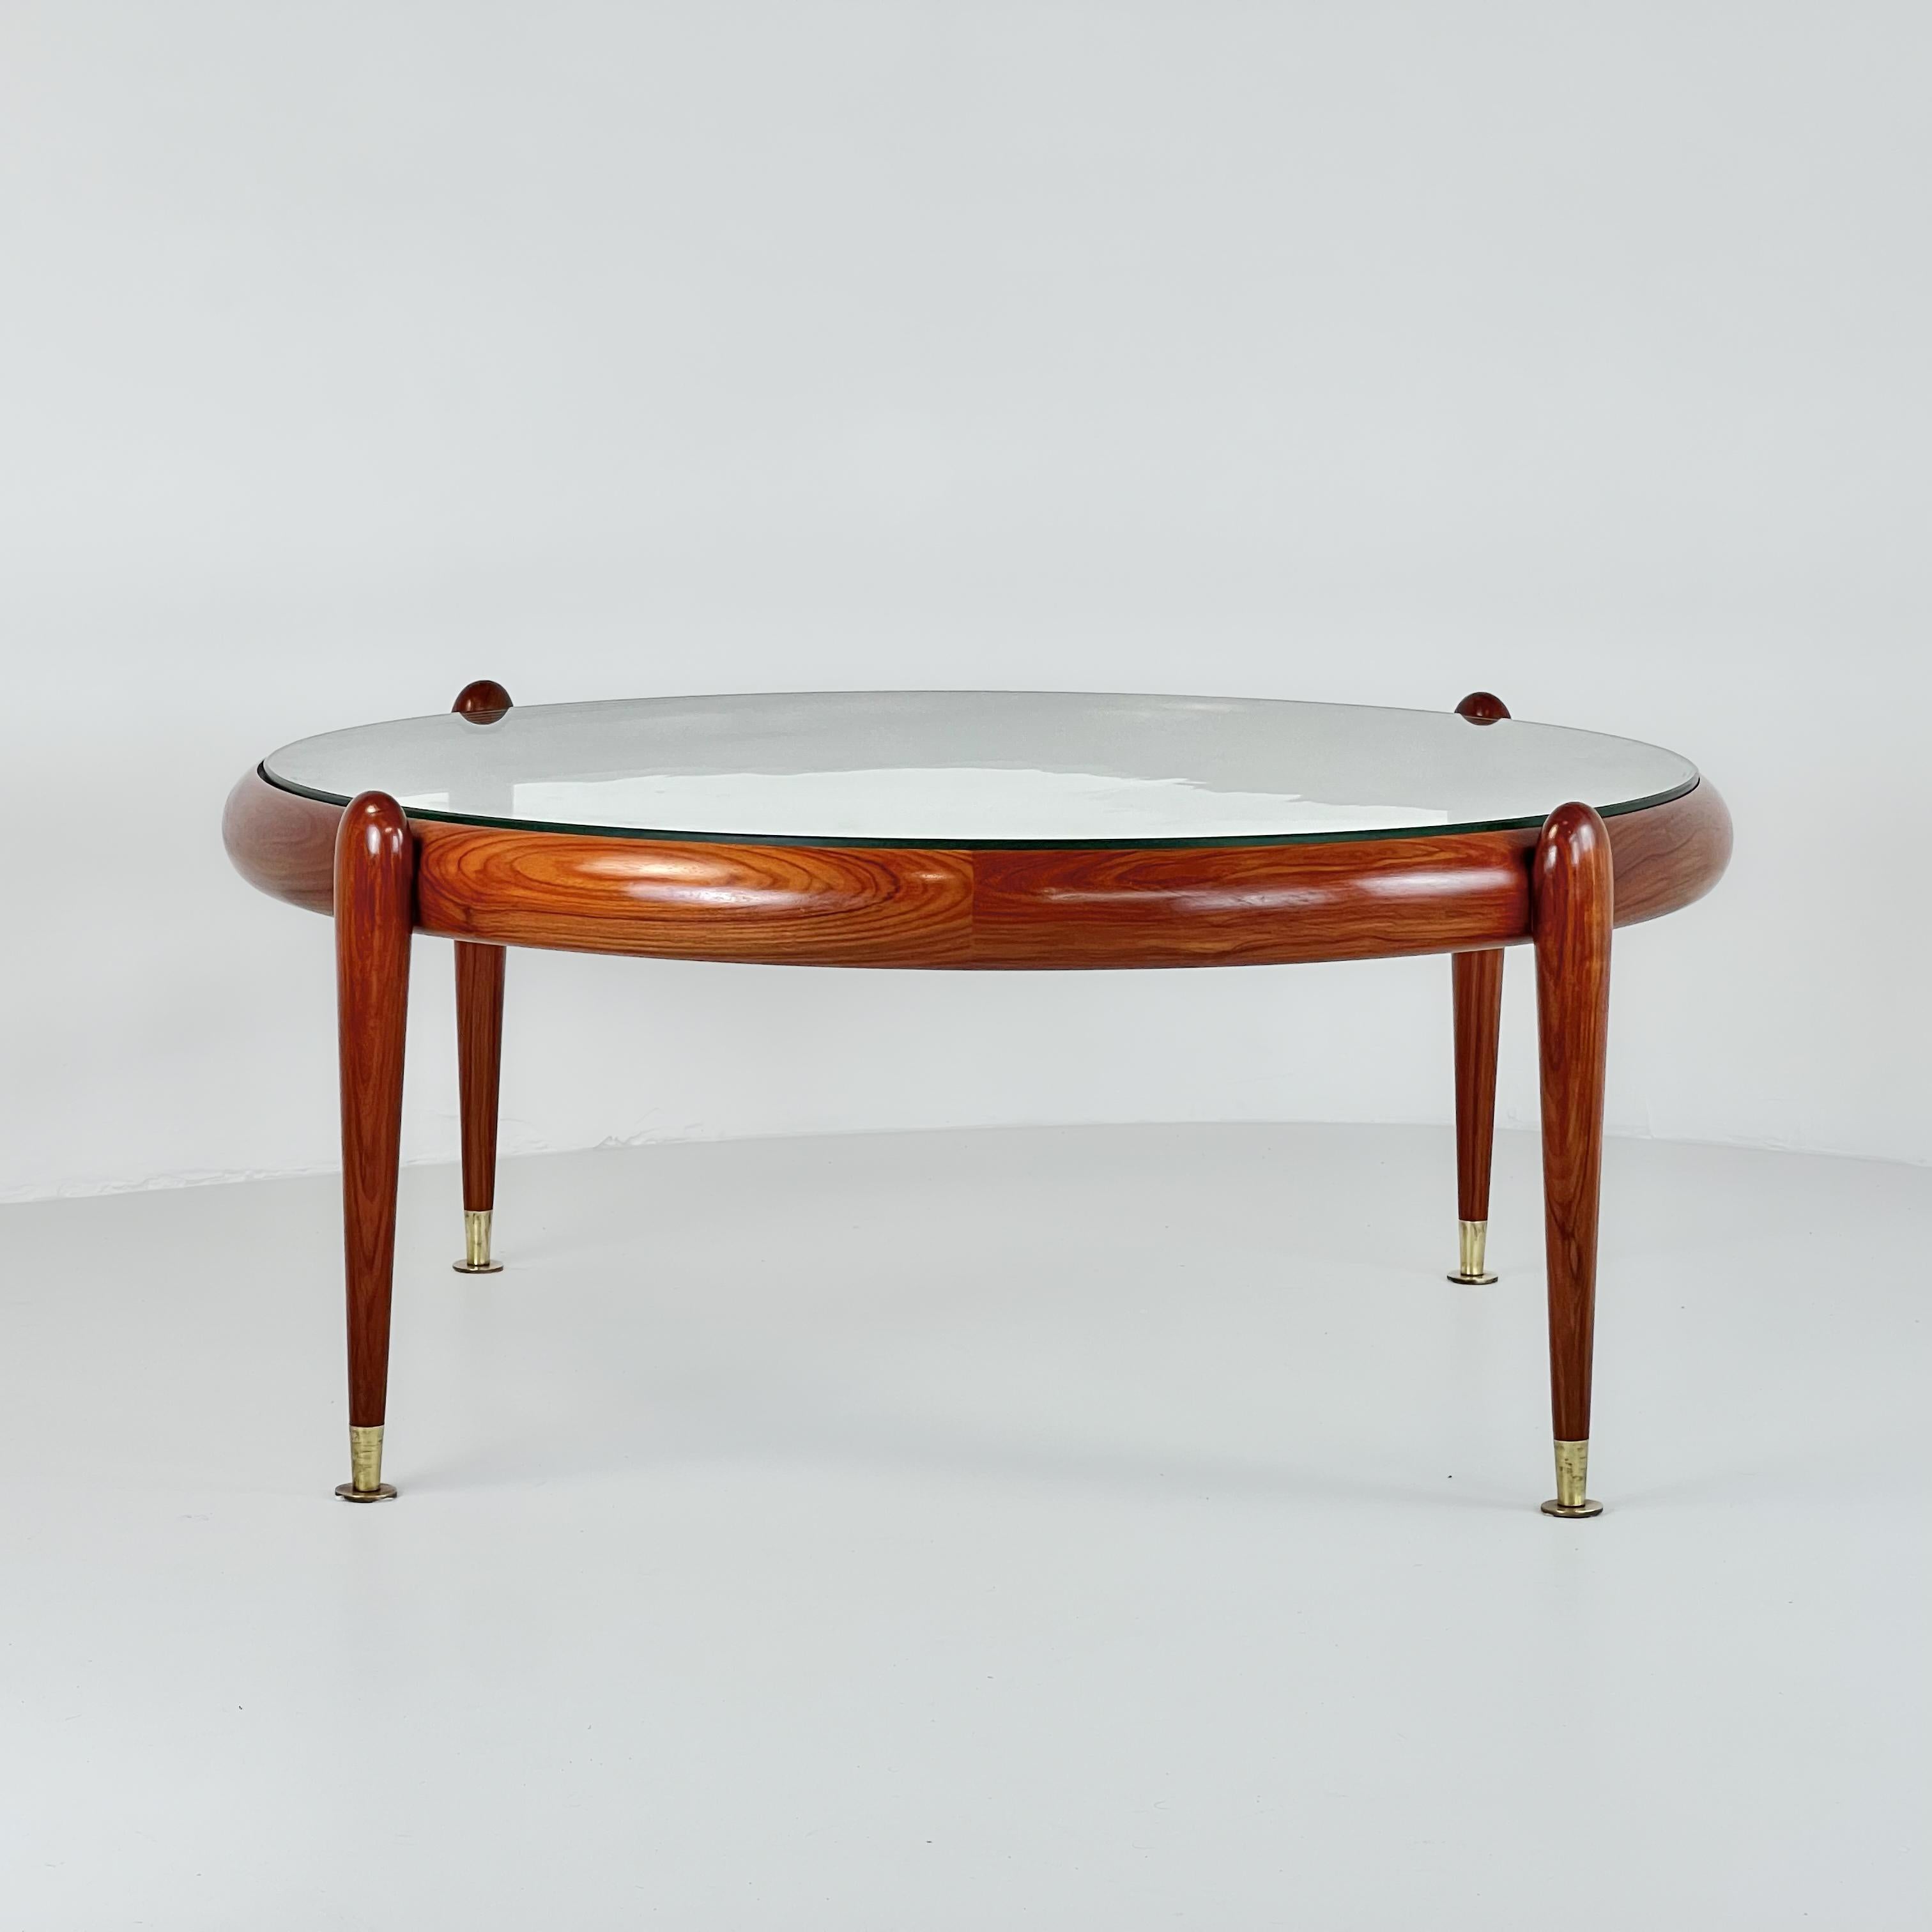 Brazilian Center Table, Giussepe Scapinelli, in Caviuna Rosewood and Brass, Brazil 1960